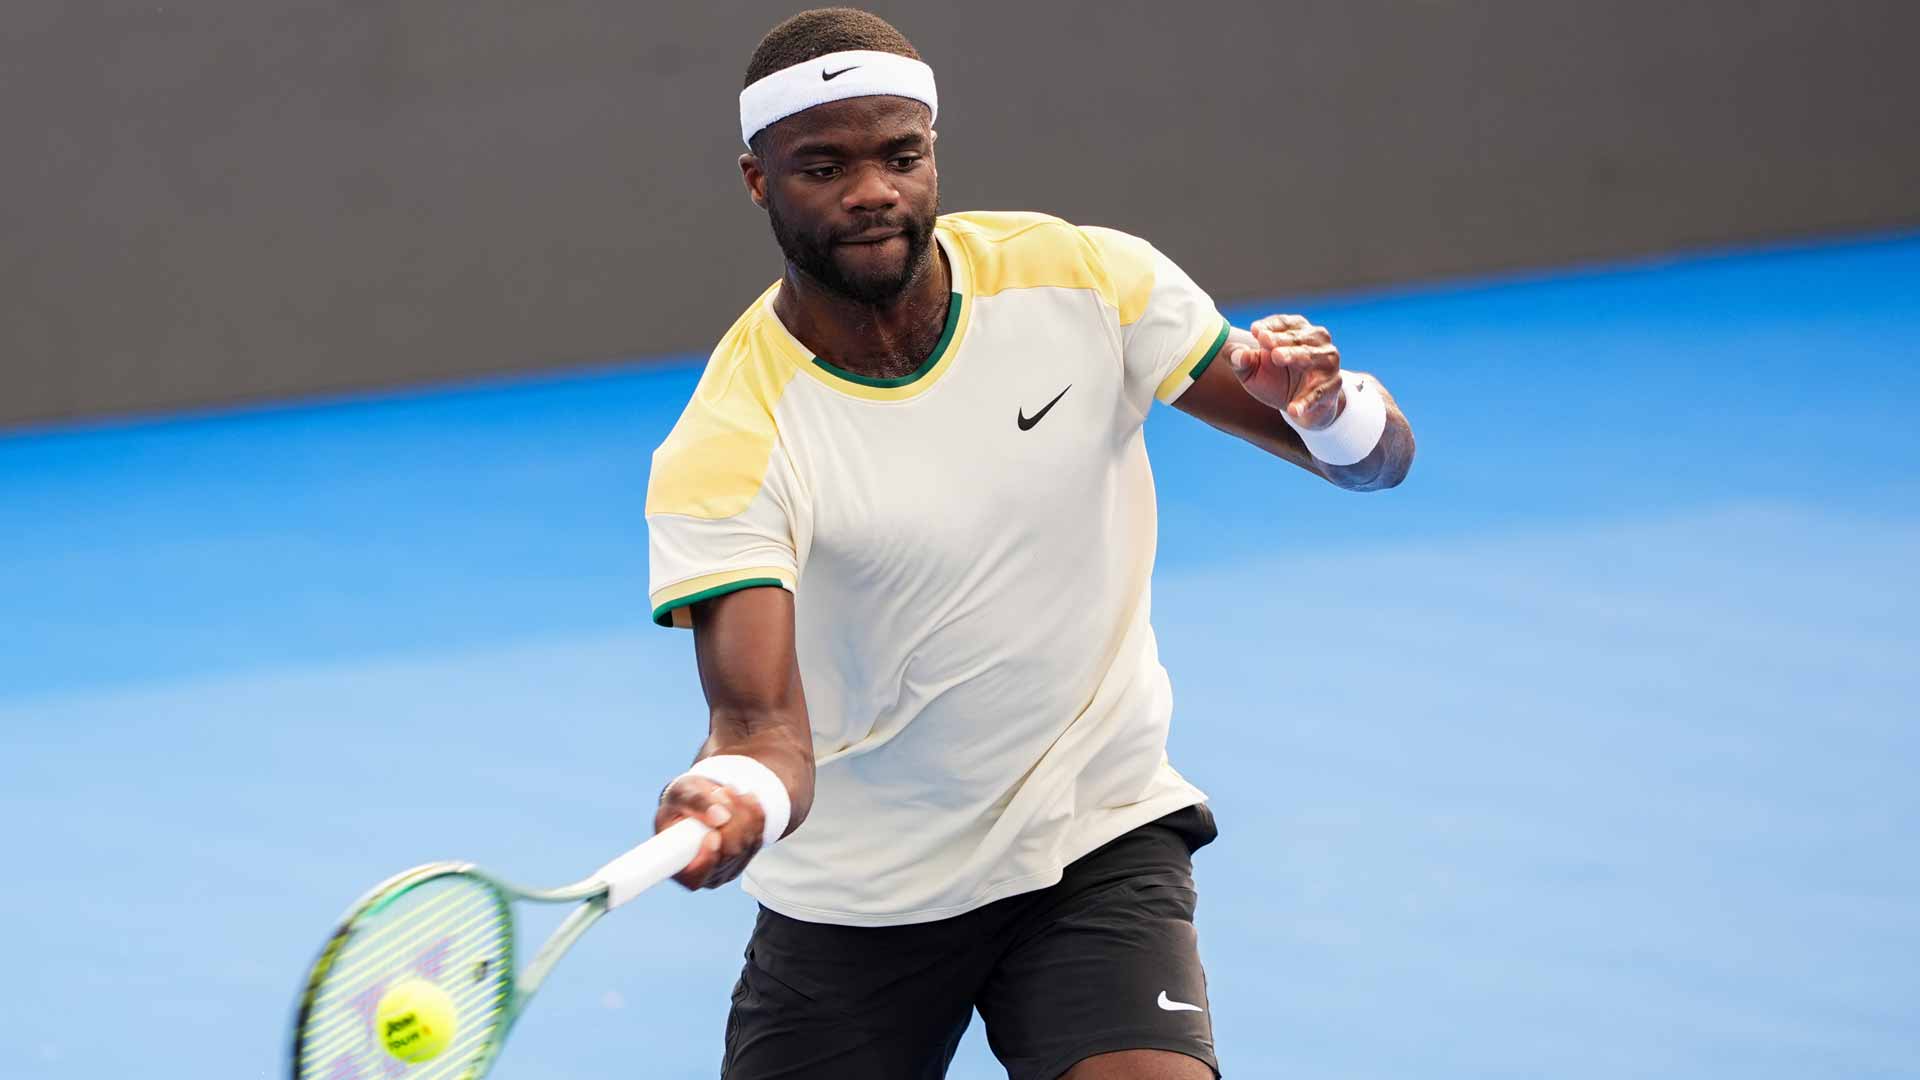 Frances Tiafoe in action Friday at the Delray Beach Open.